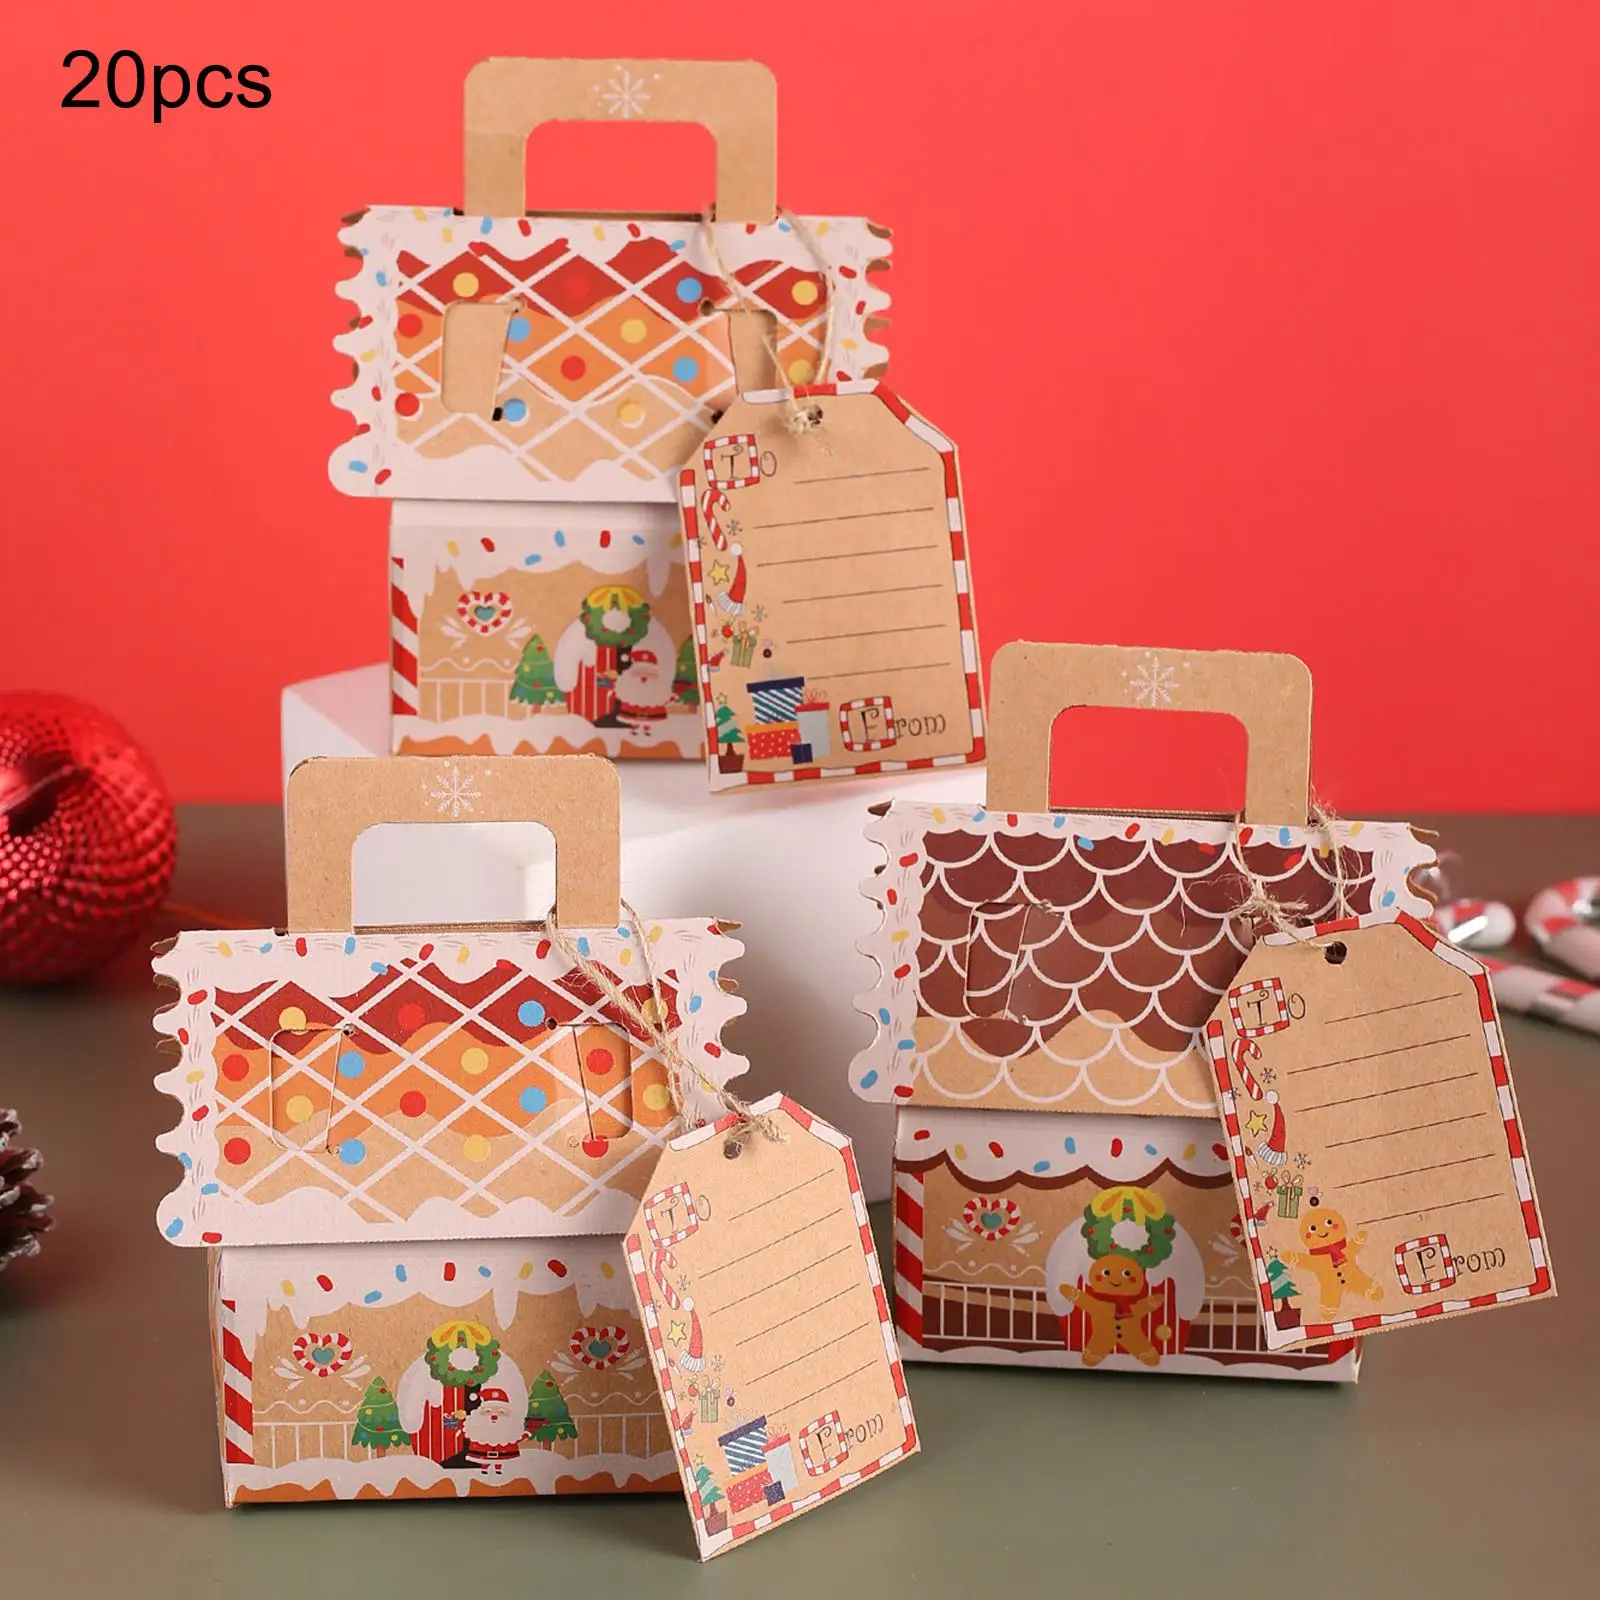 20 Pieces Candy Boxes Biscuits Bag Creative with Name Tags Christmas Treat Bags for Xmas Party Festival Birthday Holiday Dessert